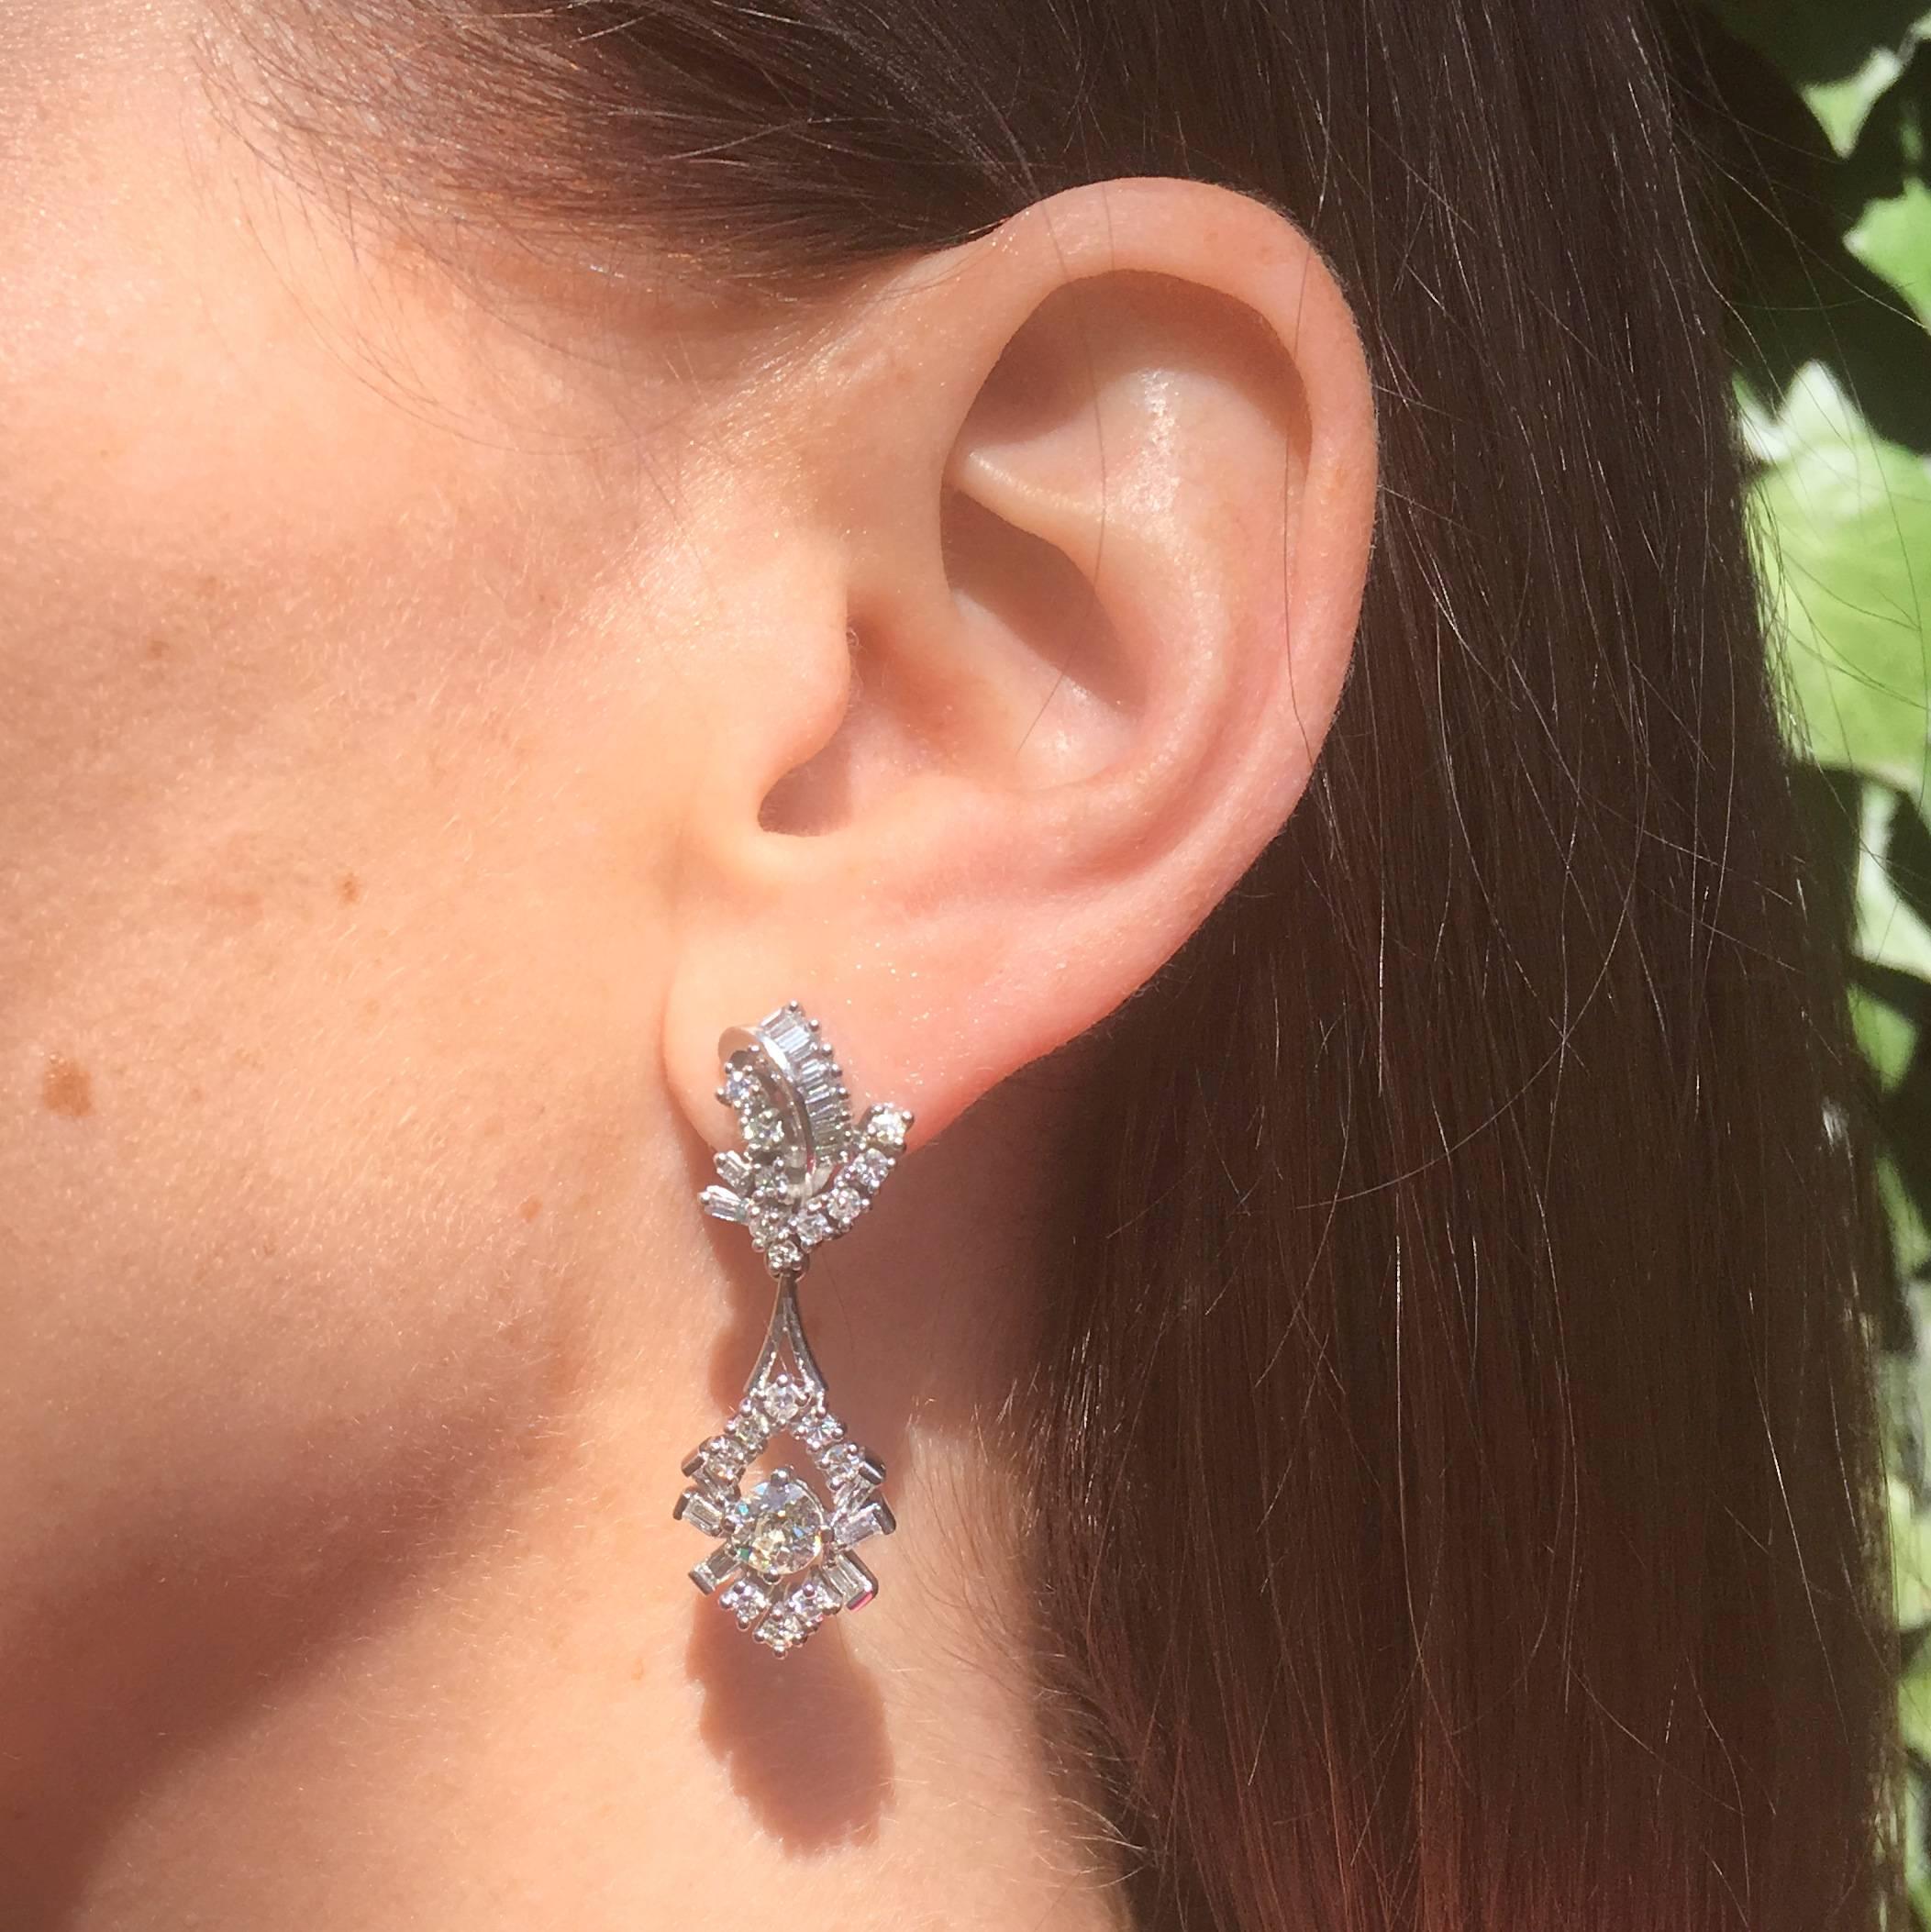 Stunningly realised diamond drop earrings. The asymmetrical top part of the earrings is set with a sweeping line of eight baguette cut diamonds set within a 